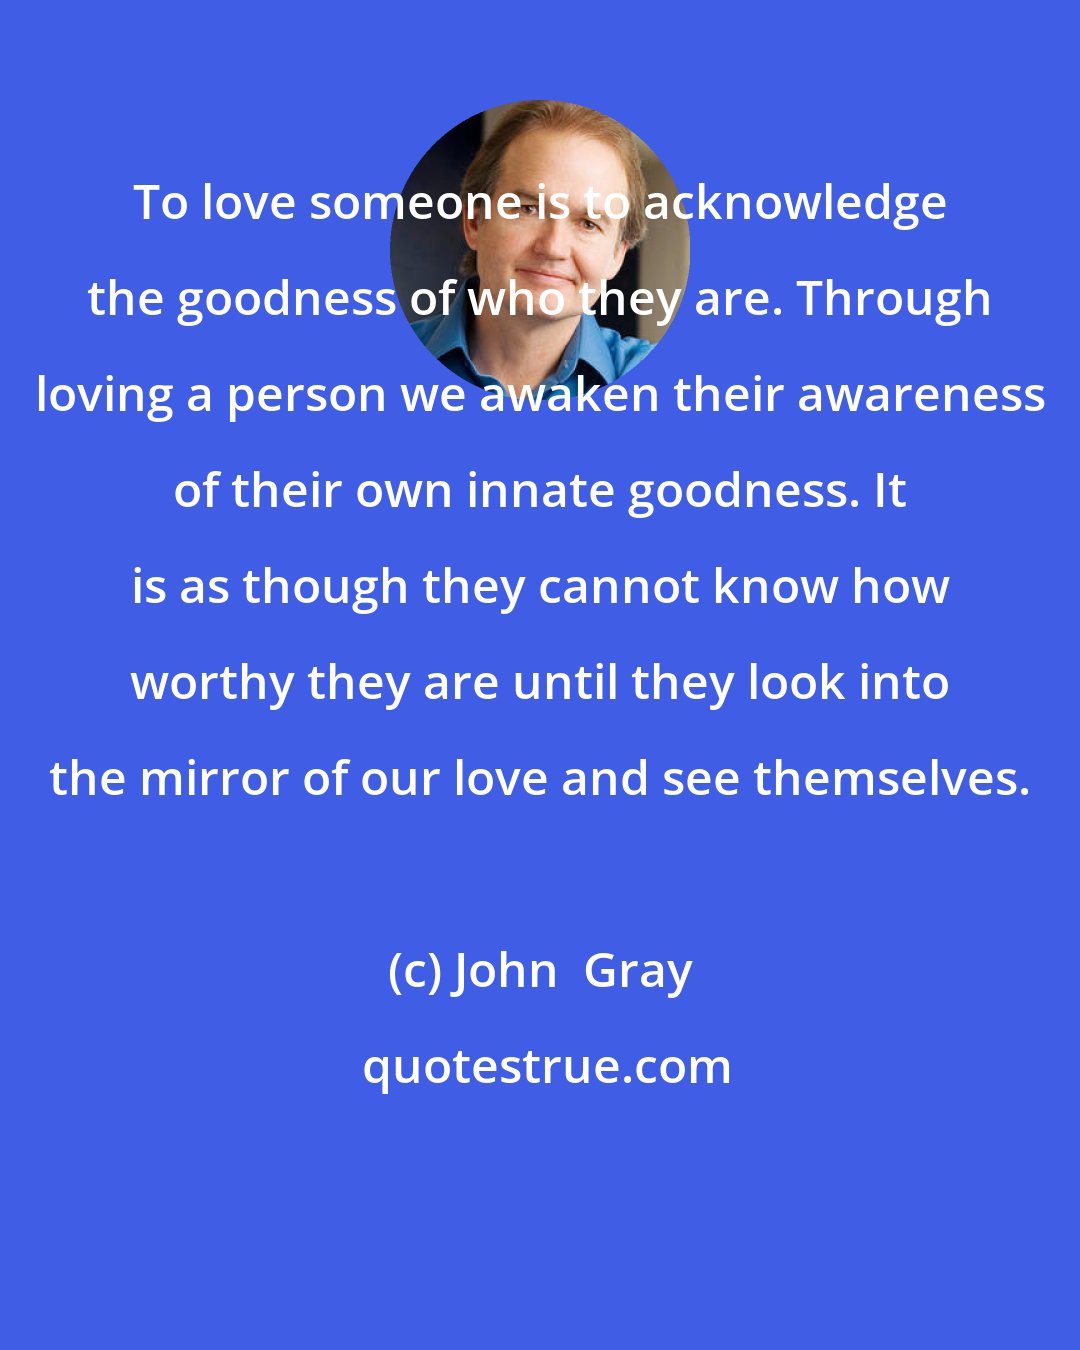 John  Gray: To love someone is to acknowledge the goodness of who they are. Through loving a person we awaken their awareness of their own innate goodness. It is as though they cannot know how worthy they are until they look into the mirror of our love and see themselves.